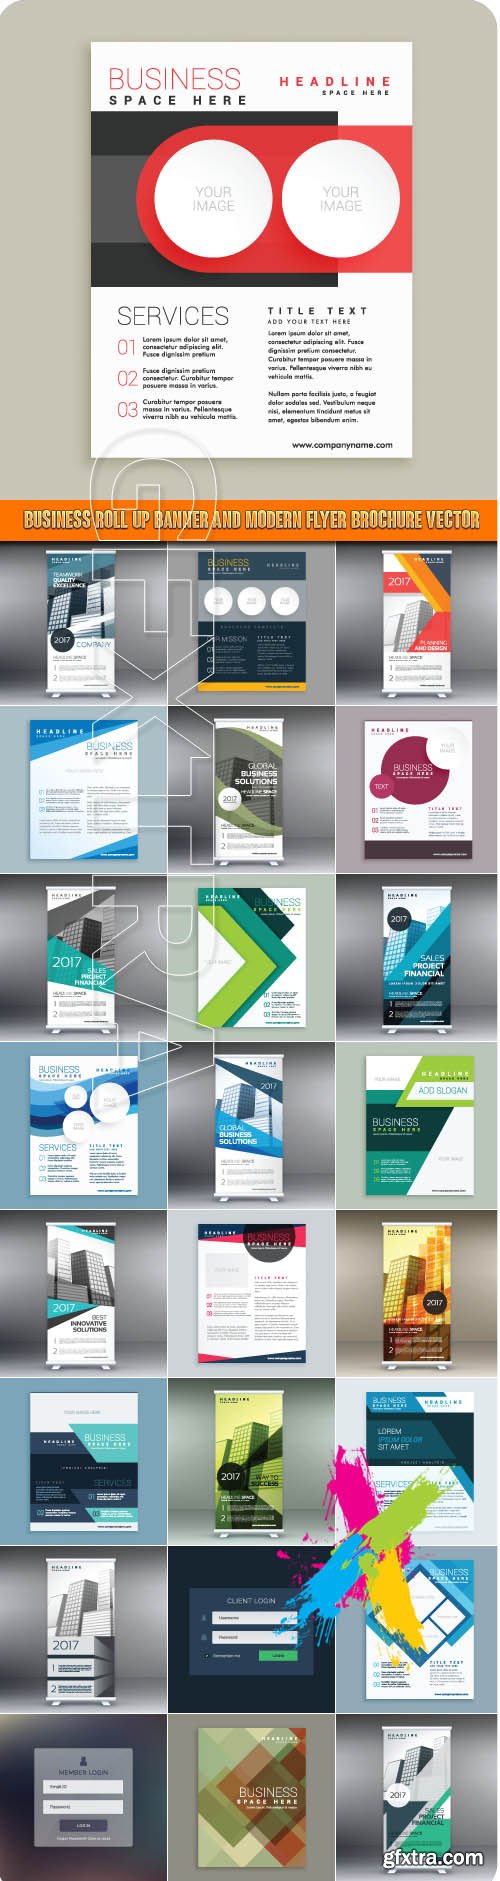 Business roll up banner and modern flyer brochure vector